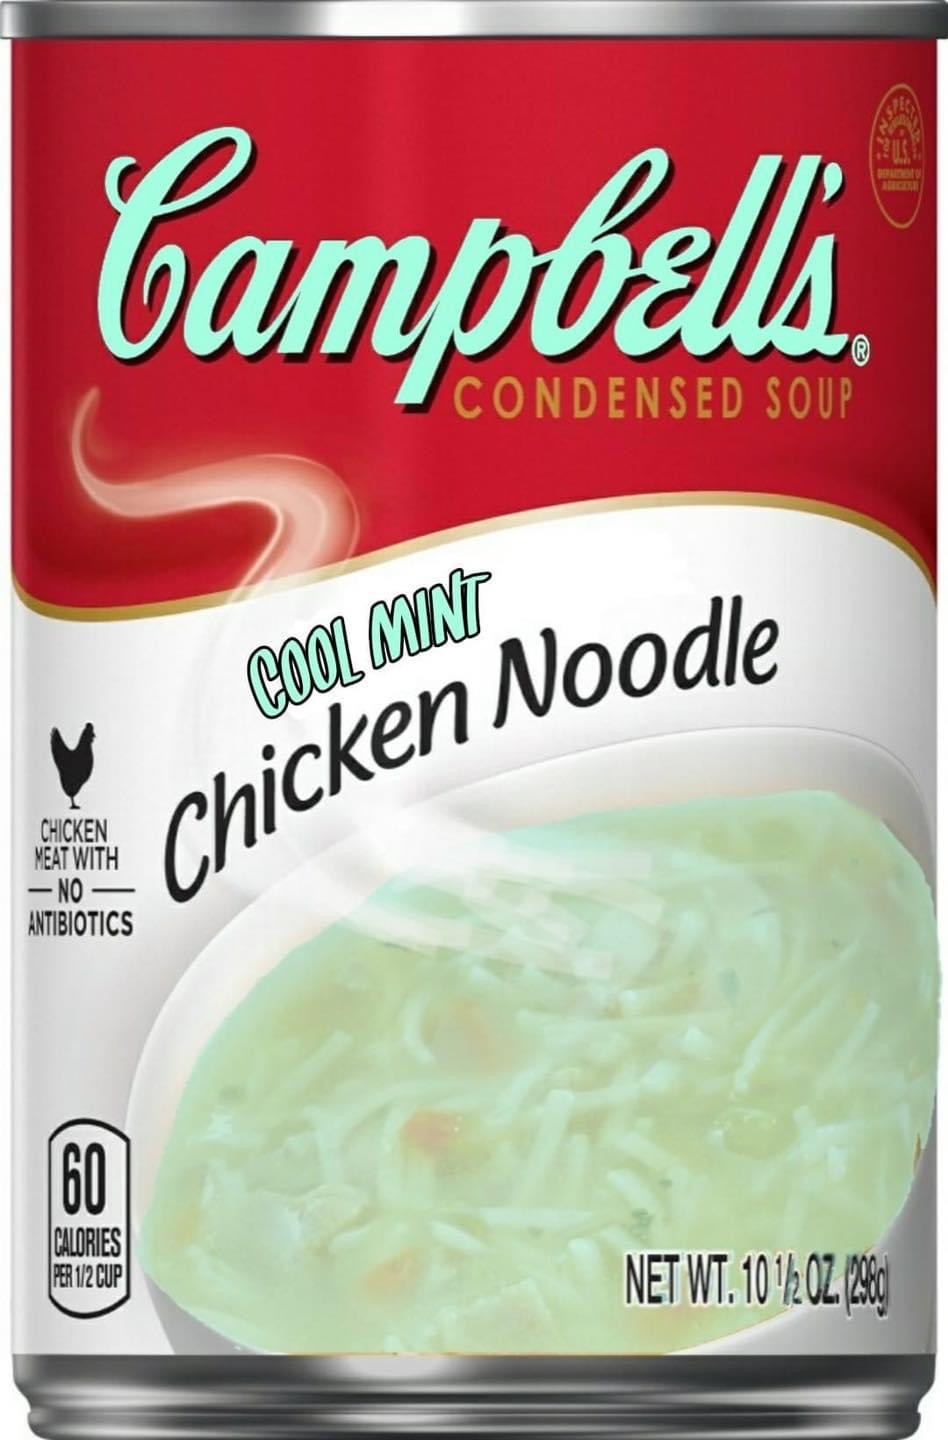 instant mashed potatoes - Chicken Noodle Campbells Condensed Soup Cool Min Chicken Meat With No Antibiotics 160 | Calories Per 12 Cup Net Wt. 10 12 Oz .